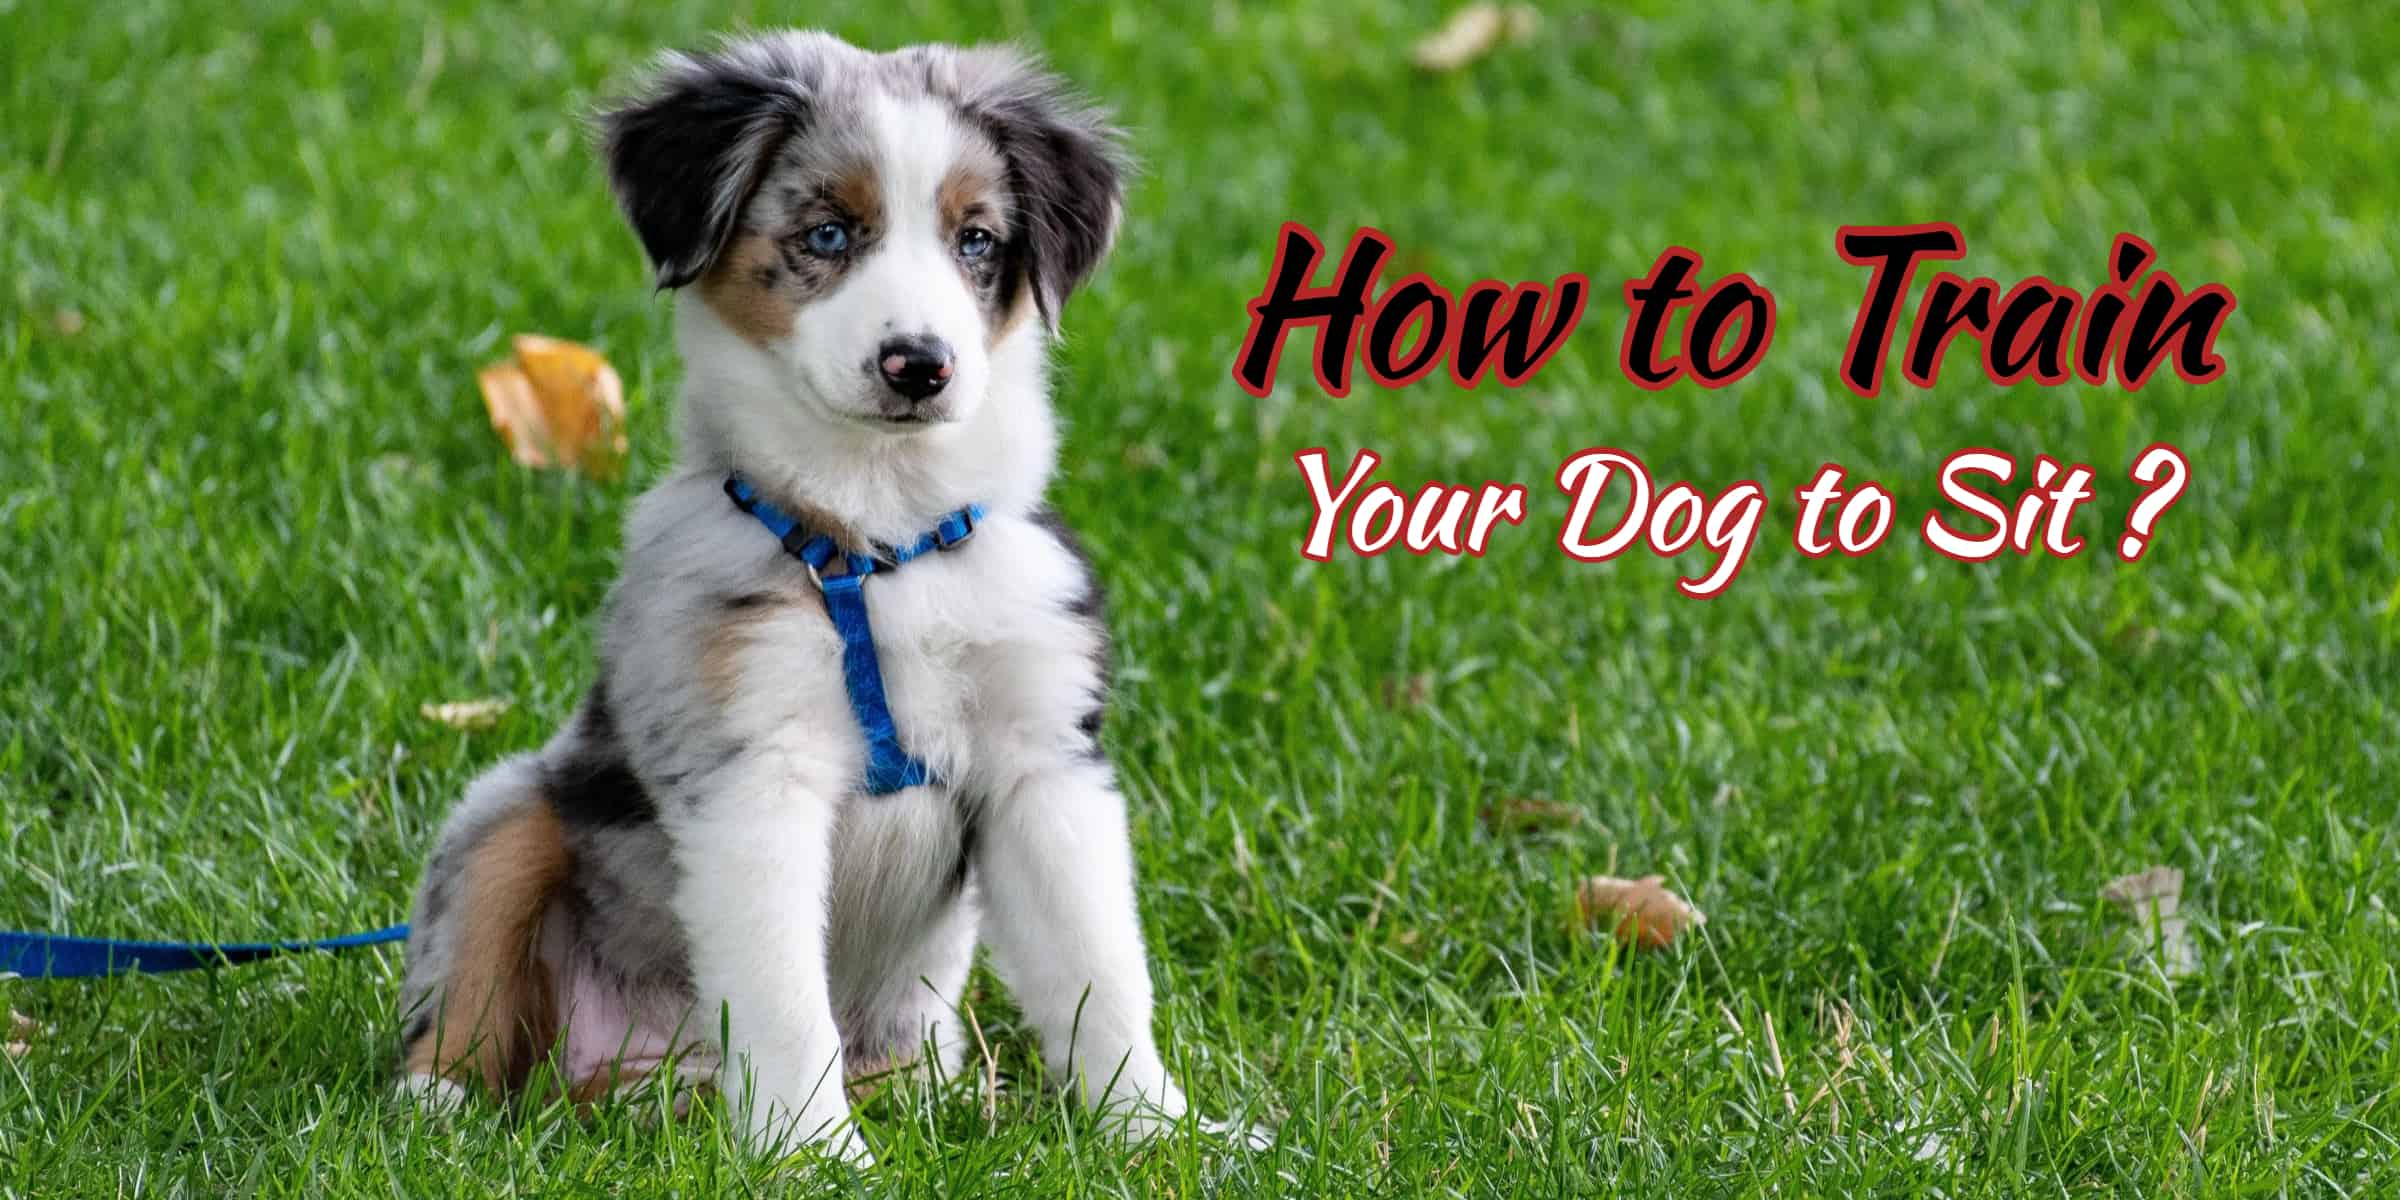 How To Train Your Dog To Sit?